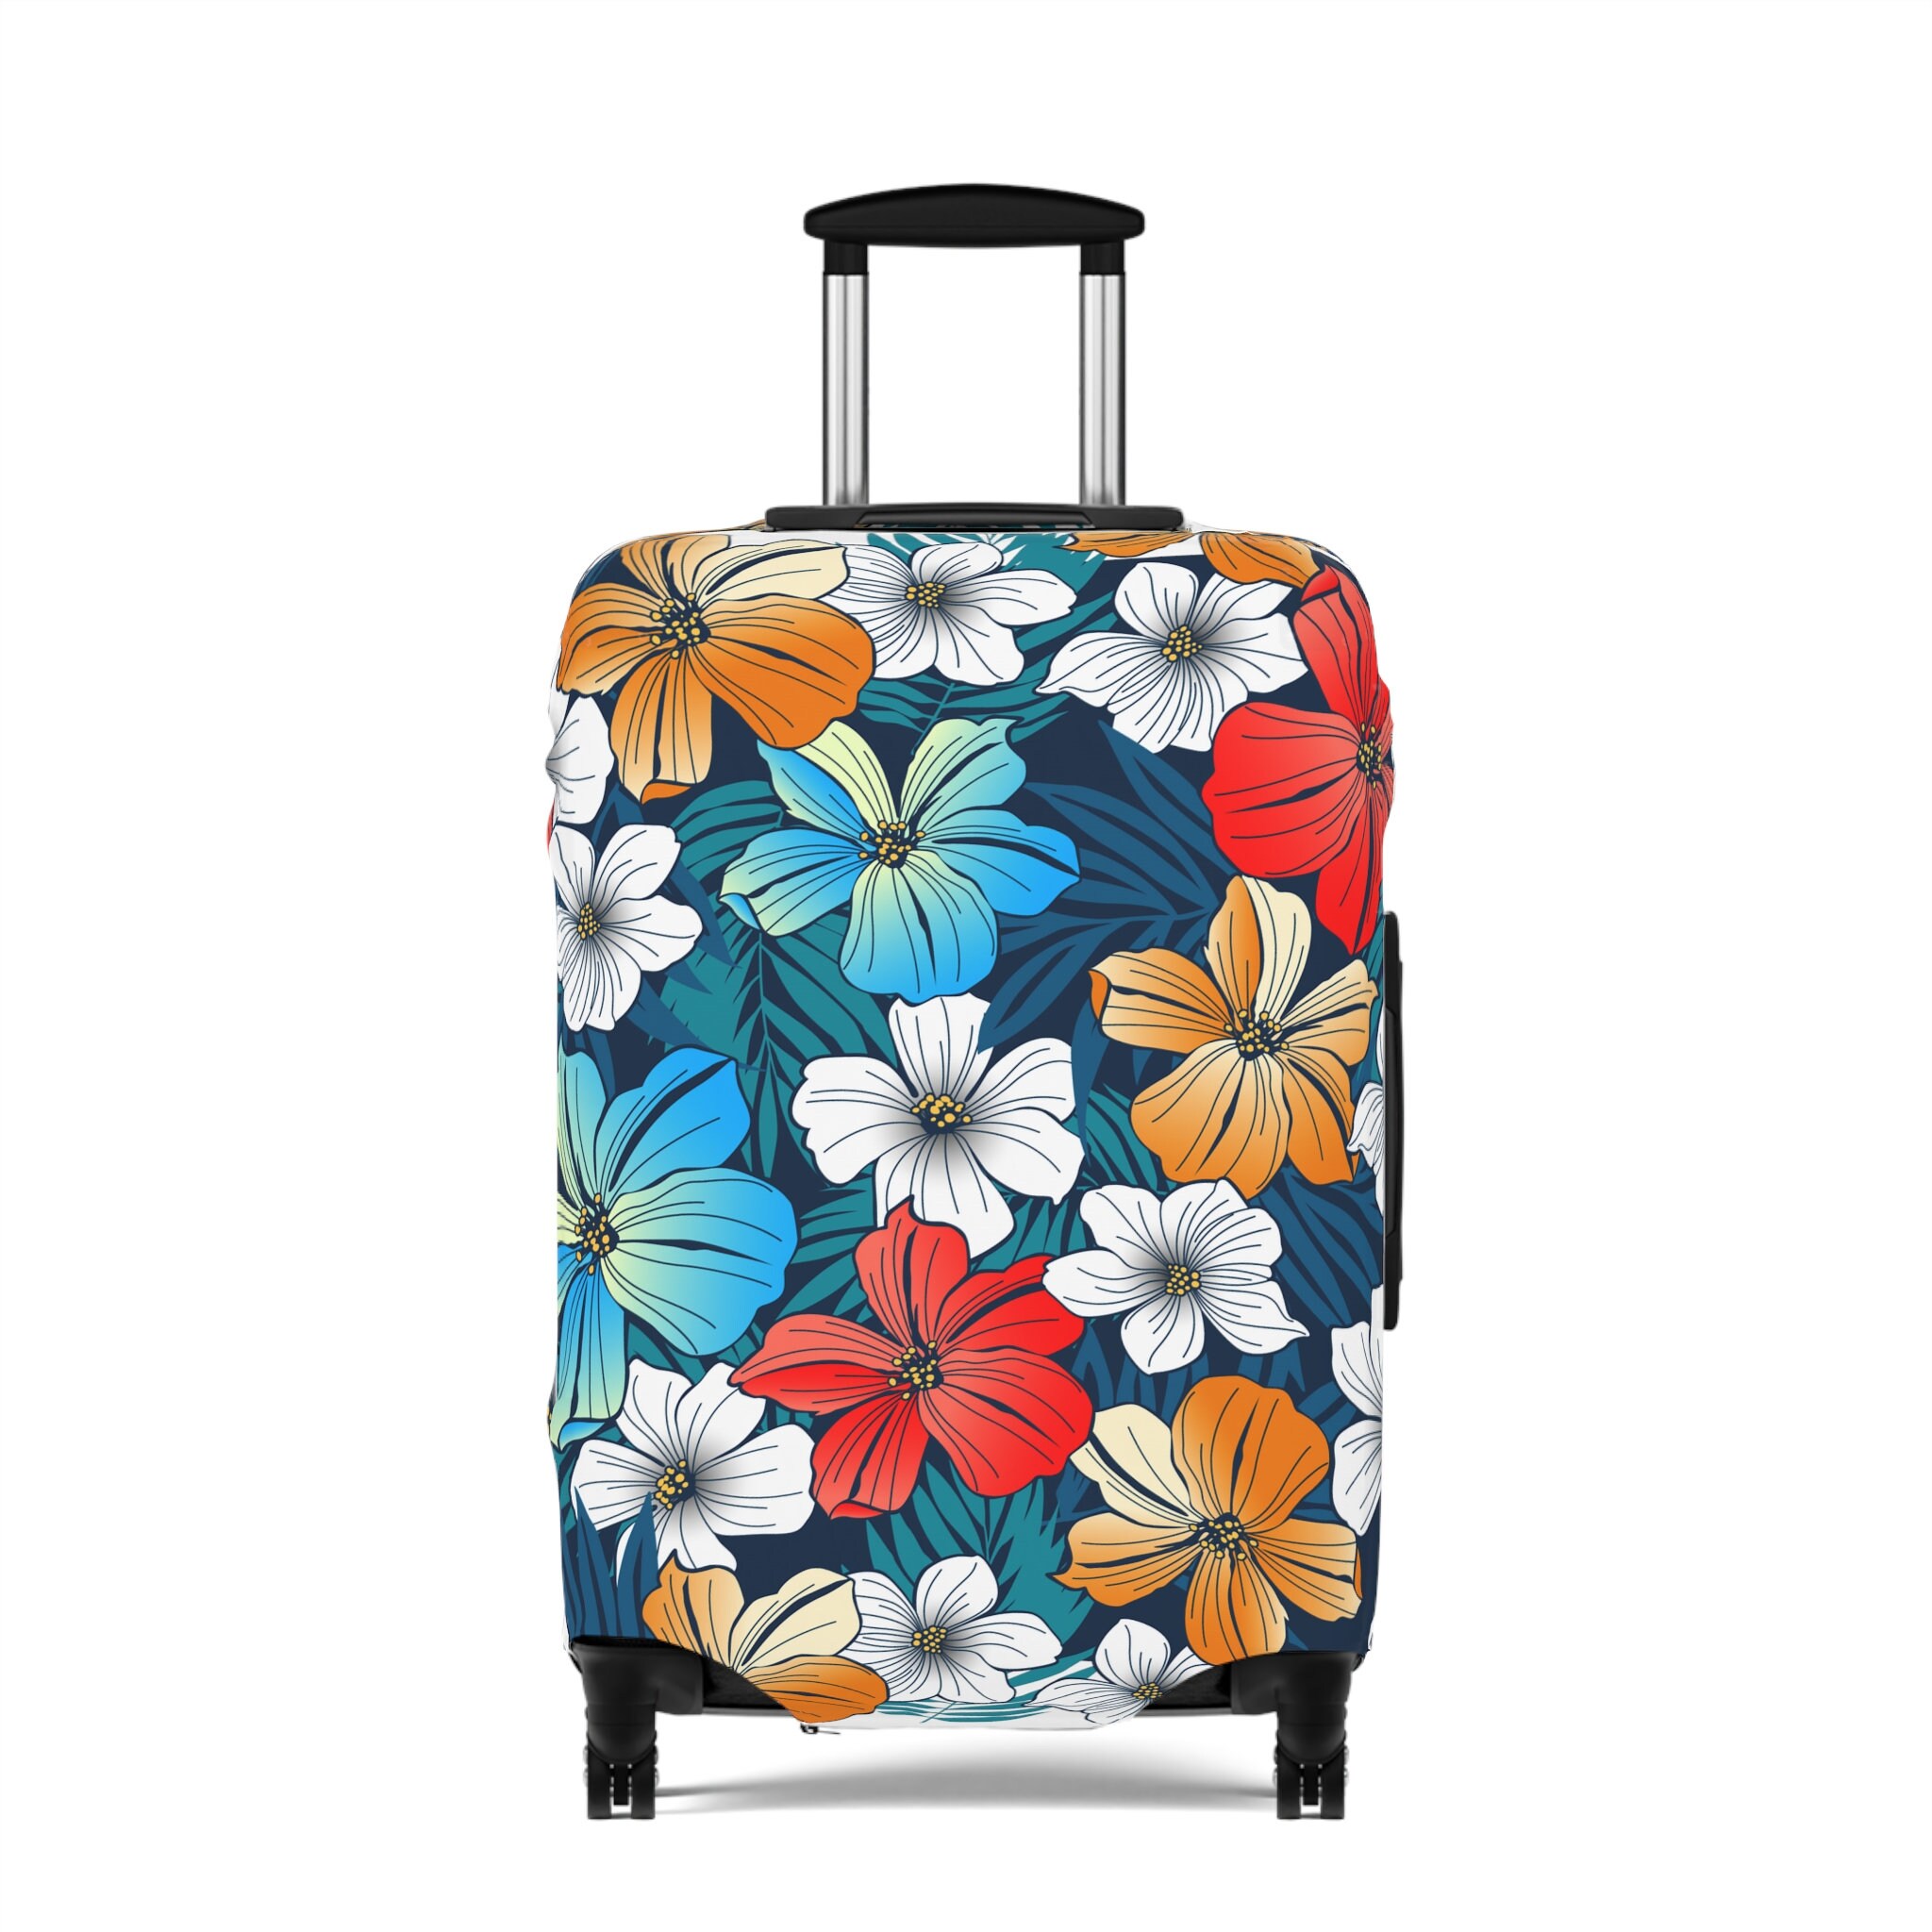 Luggage Cover - Bright Blue Beach Tropical Flowers